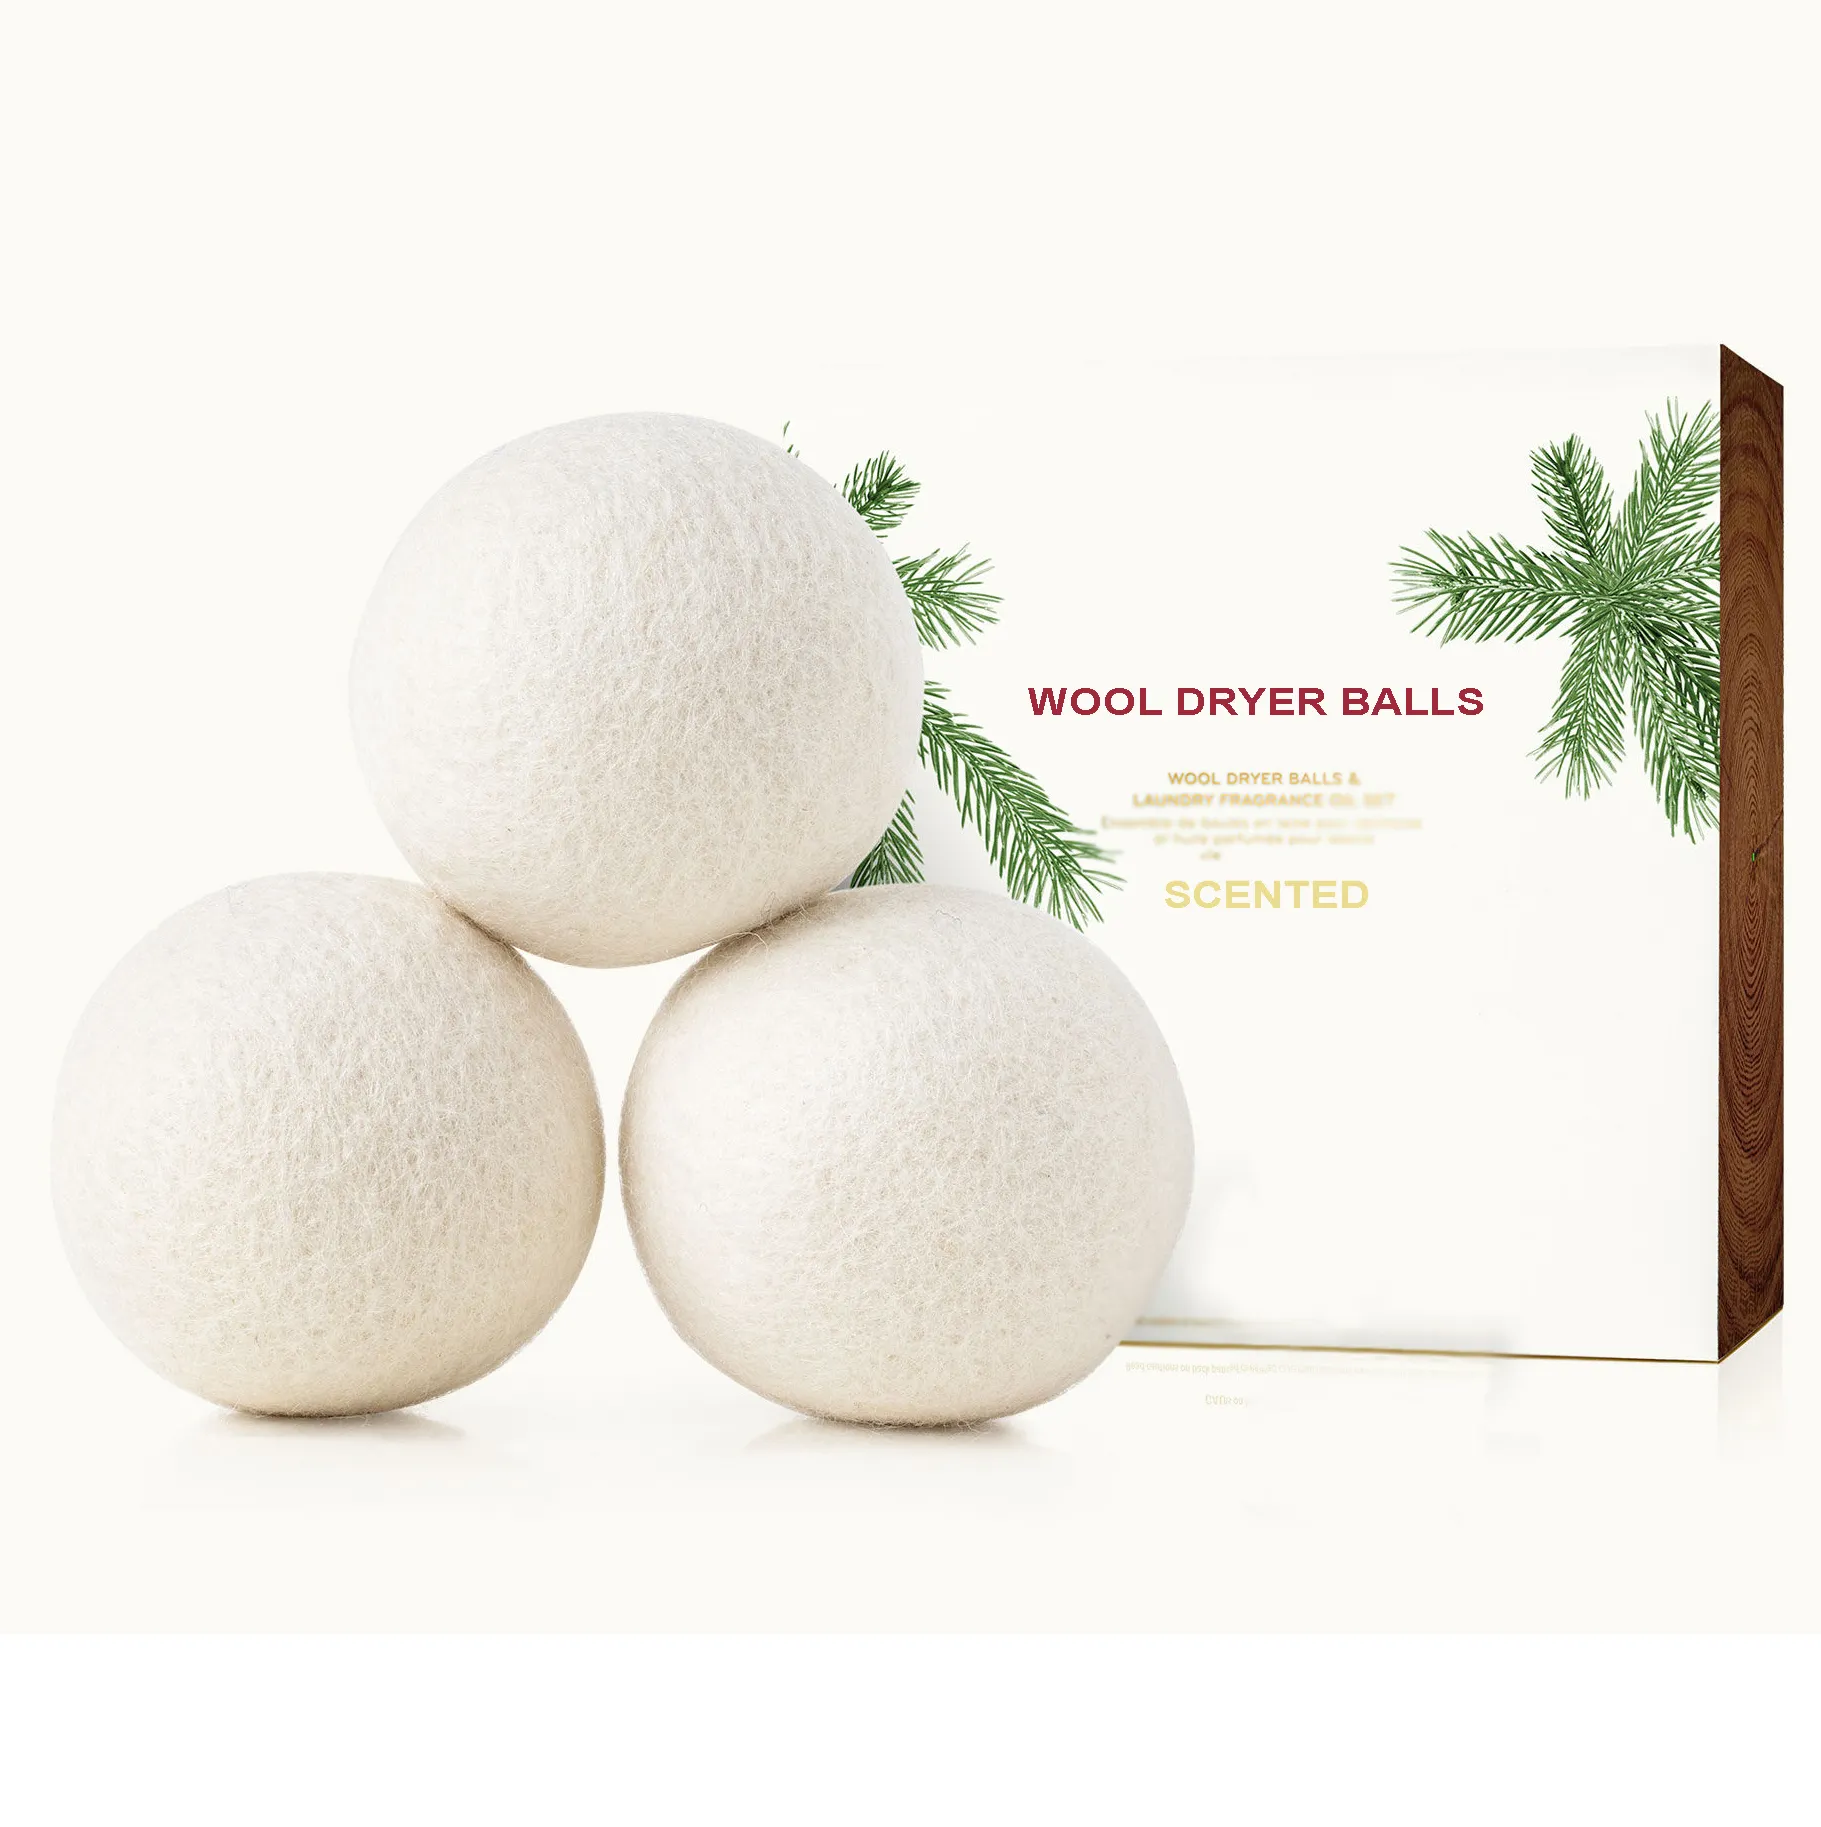 Scented Wool Dryer Balls Lavender Essential Oil Infused Set of 6 Natural dryer balls with scent